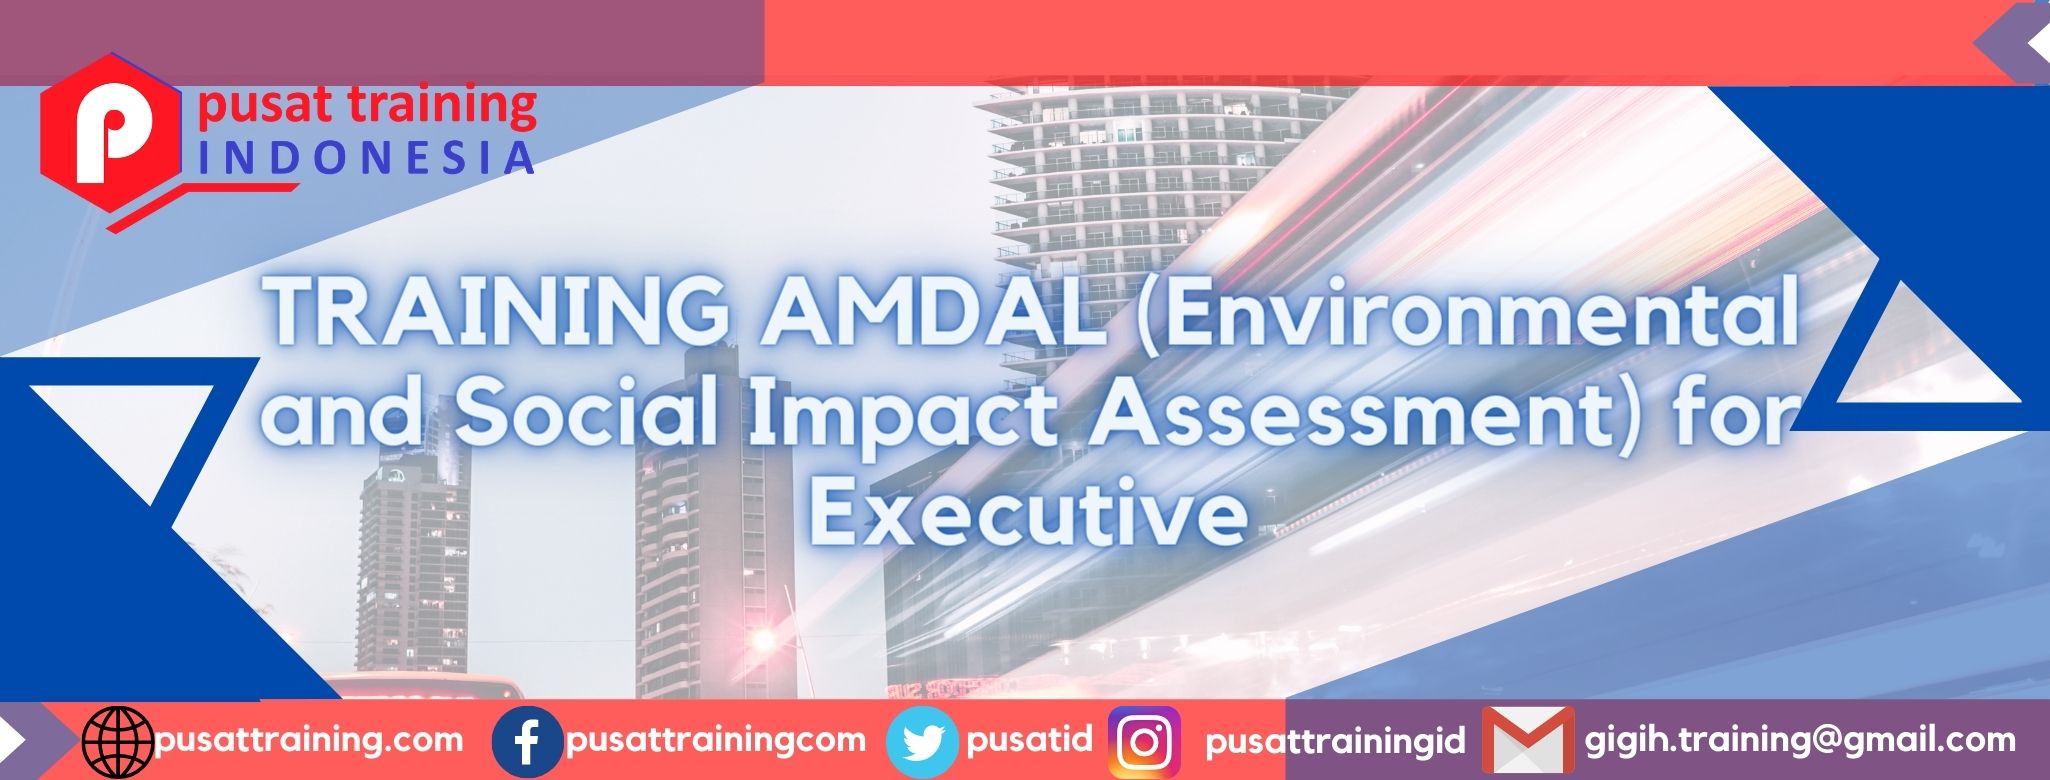 TRAINING AMDAL (Environmental and Social Impact Assessment) for Executive